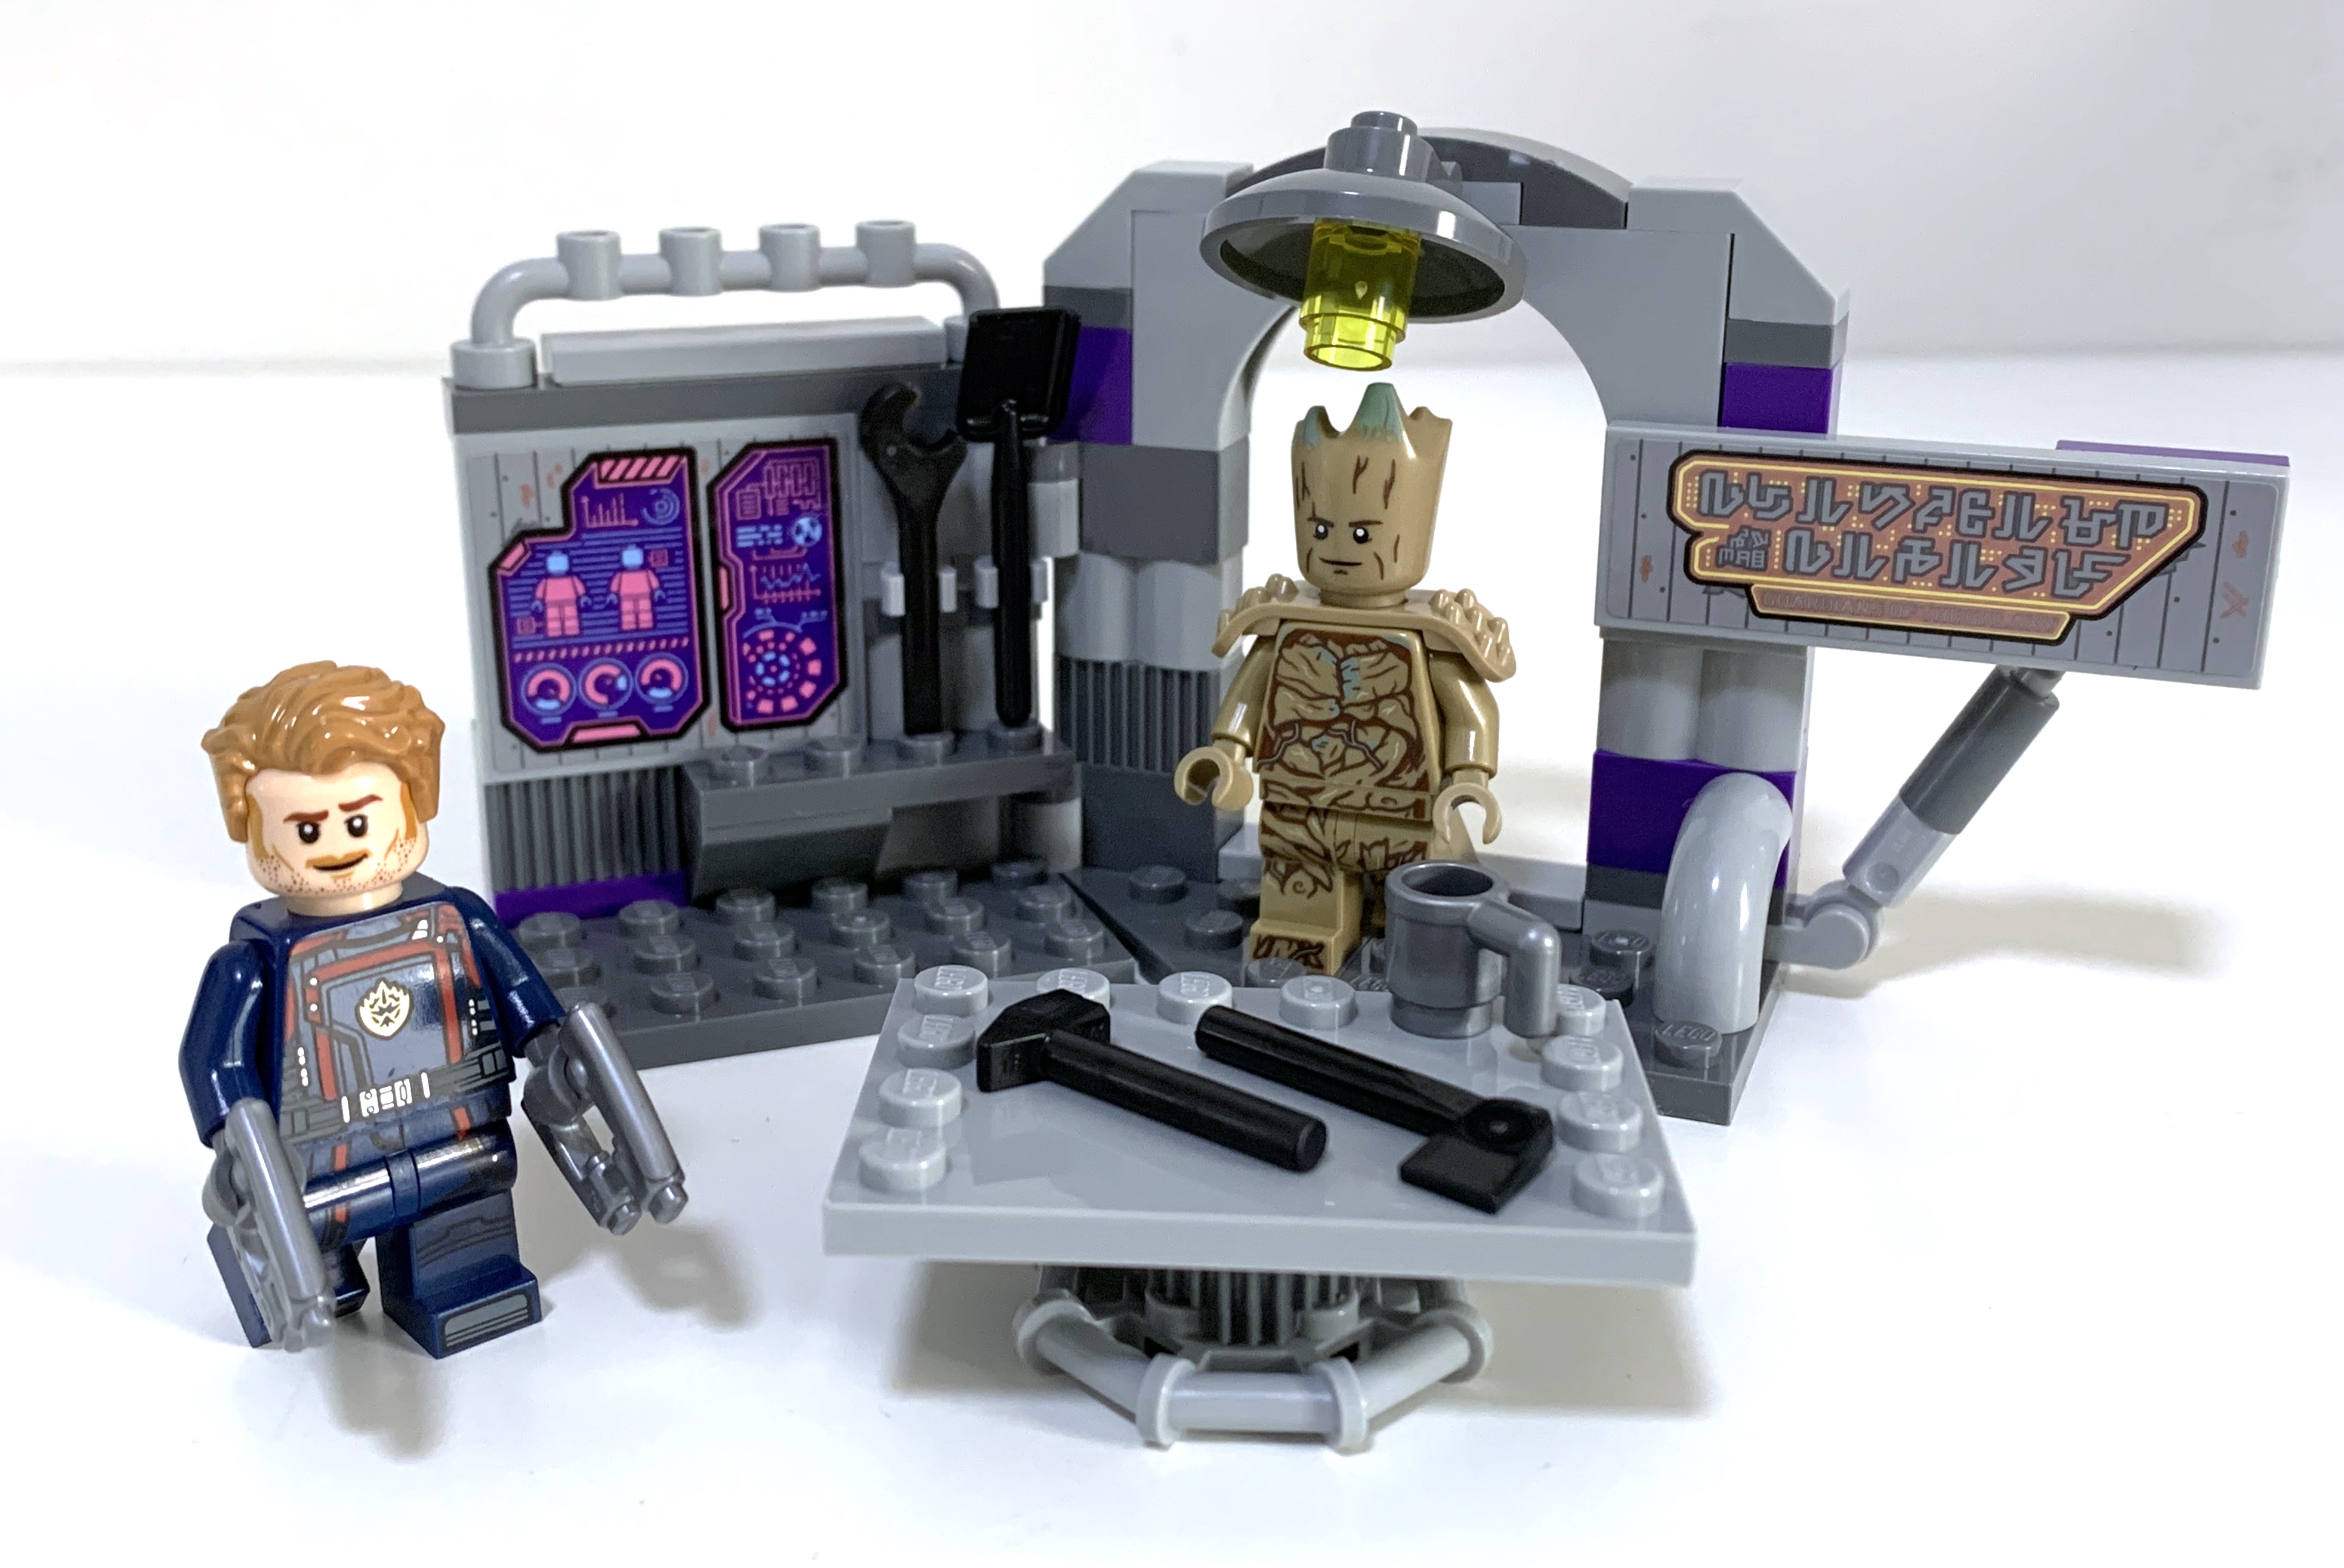 Review: LEGO 76253 Guardians of the Galaxy Headquarters - Jay's Brick Blog